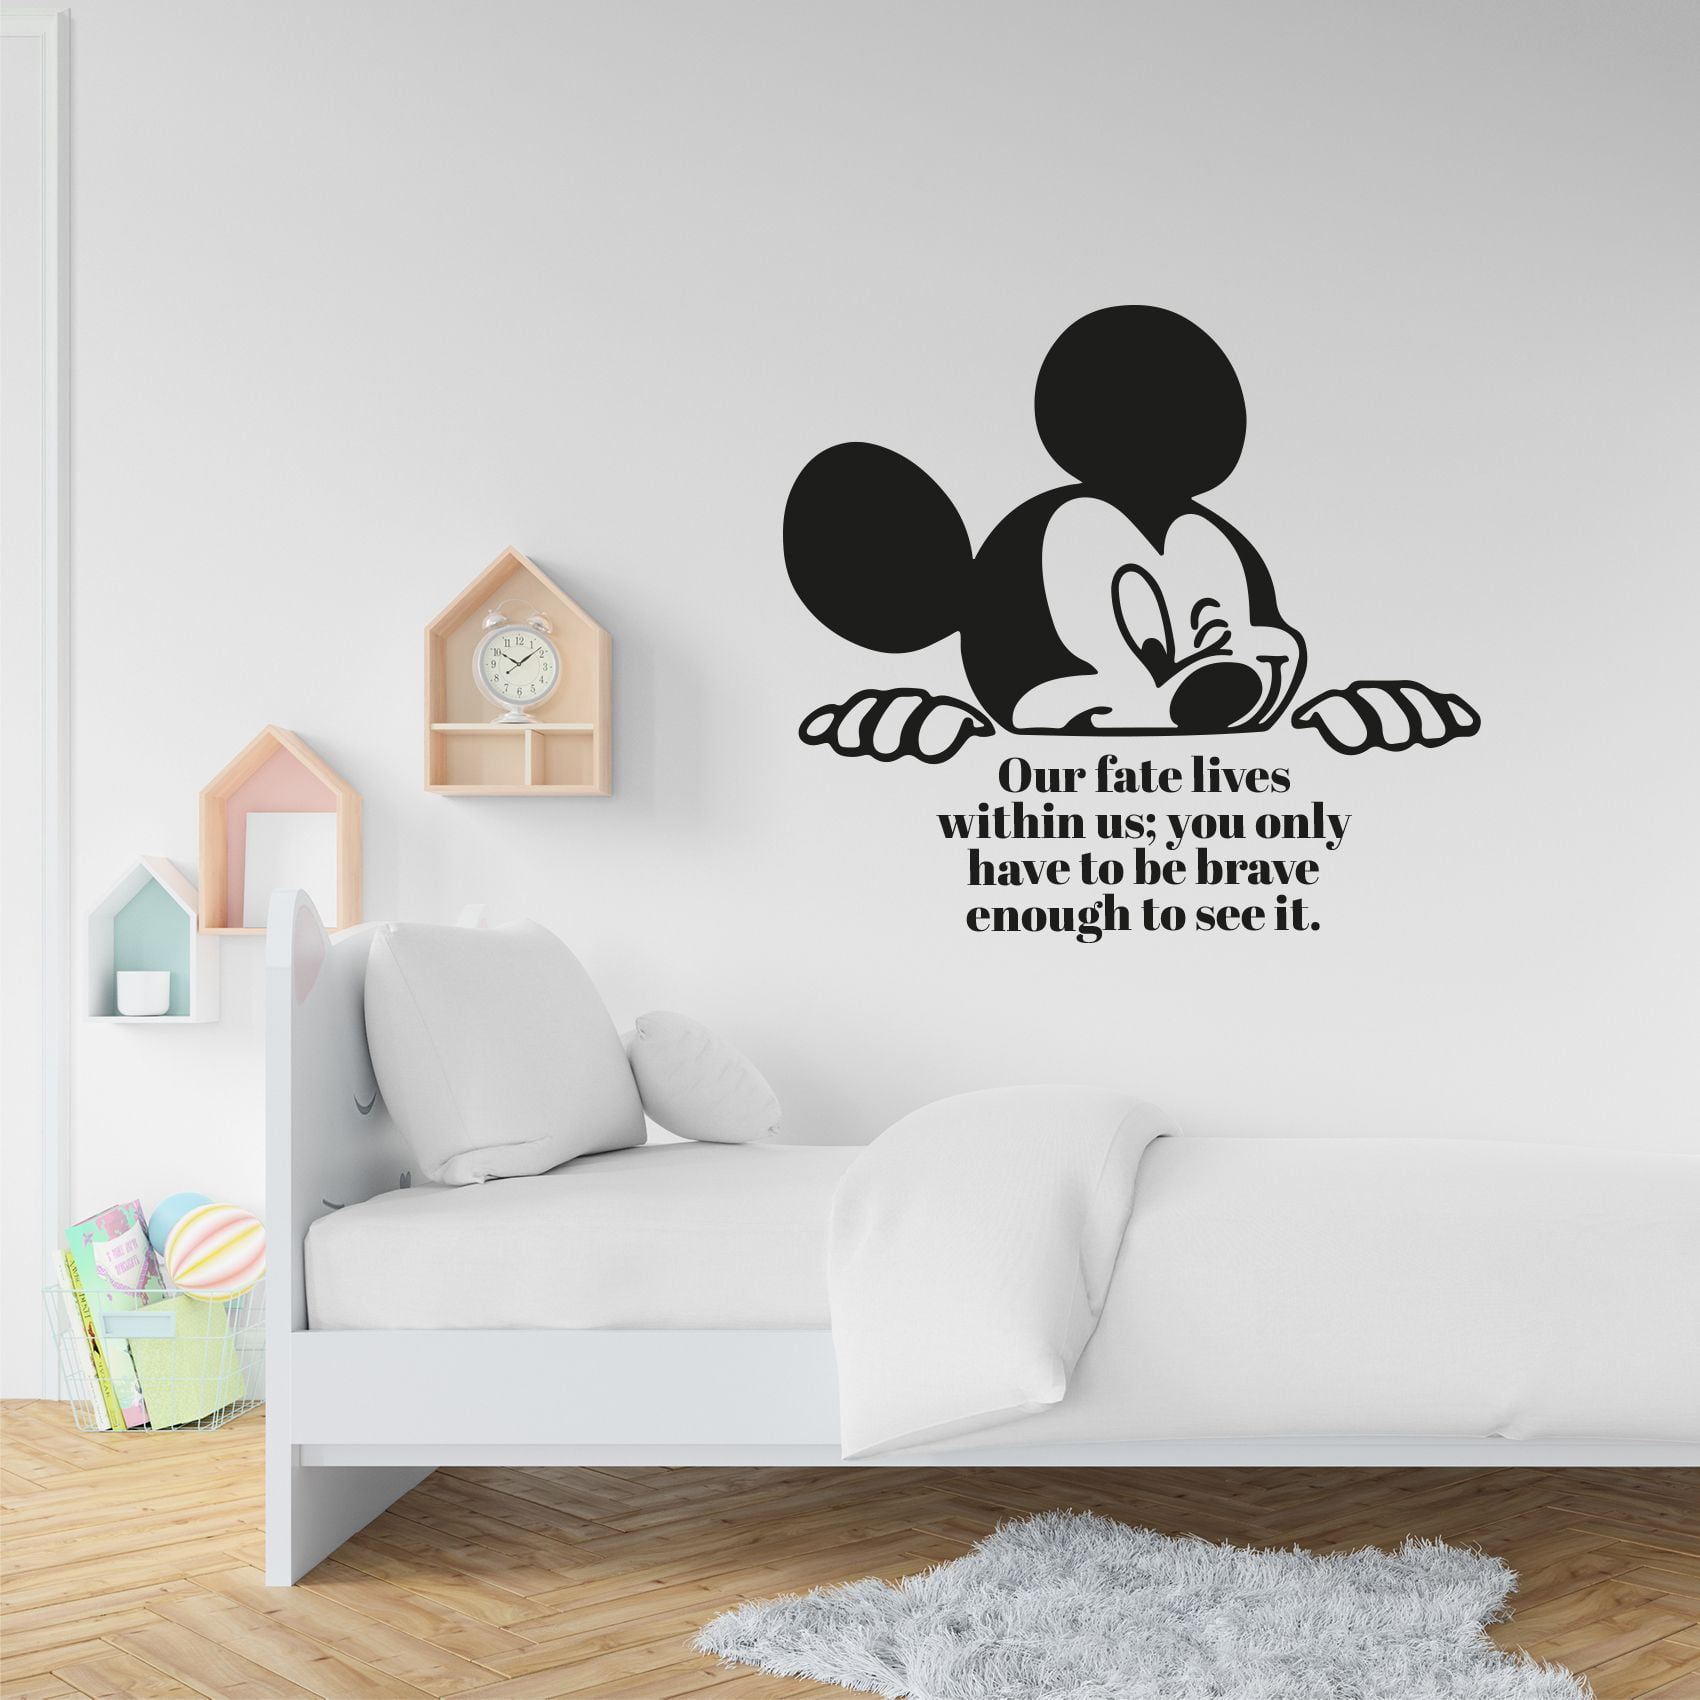 Cartoon Minnie Wall Stickers Flower For Rooms Children Bedroom Living Room